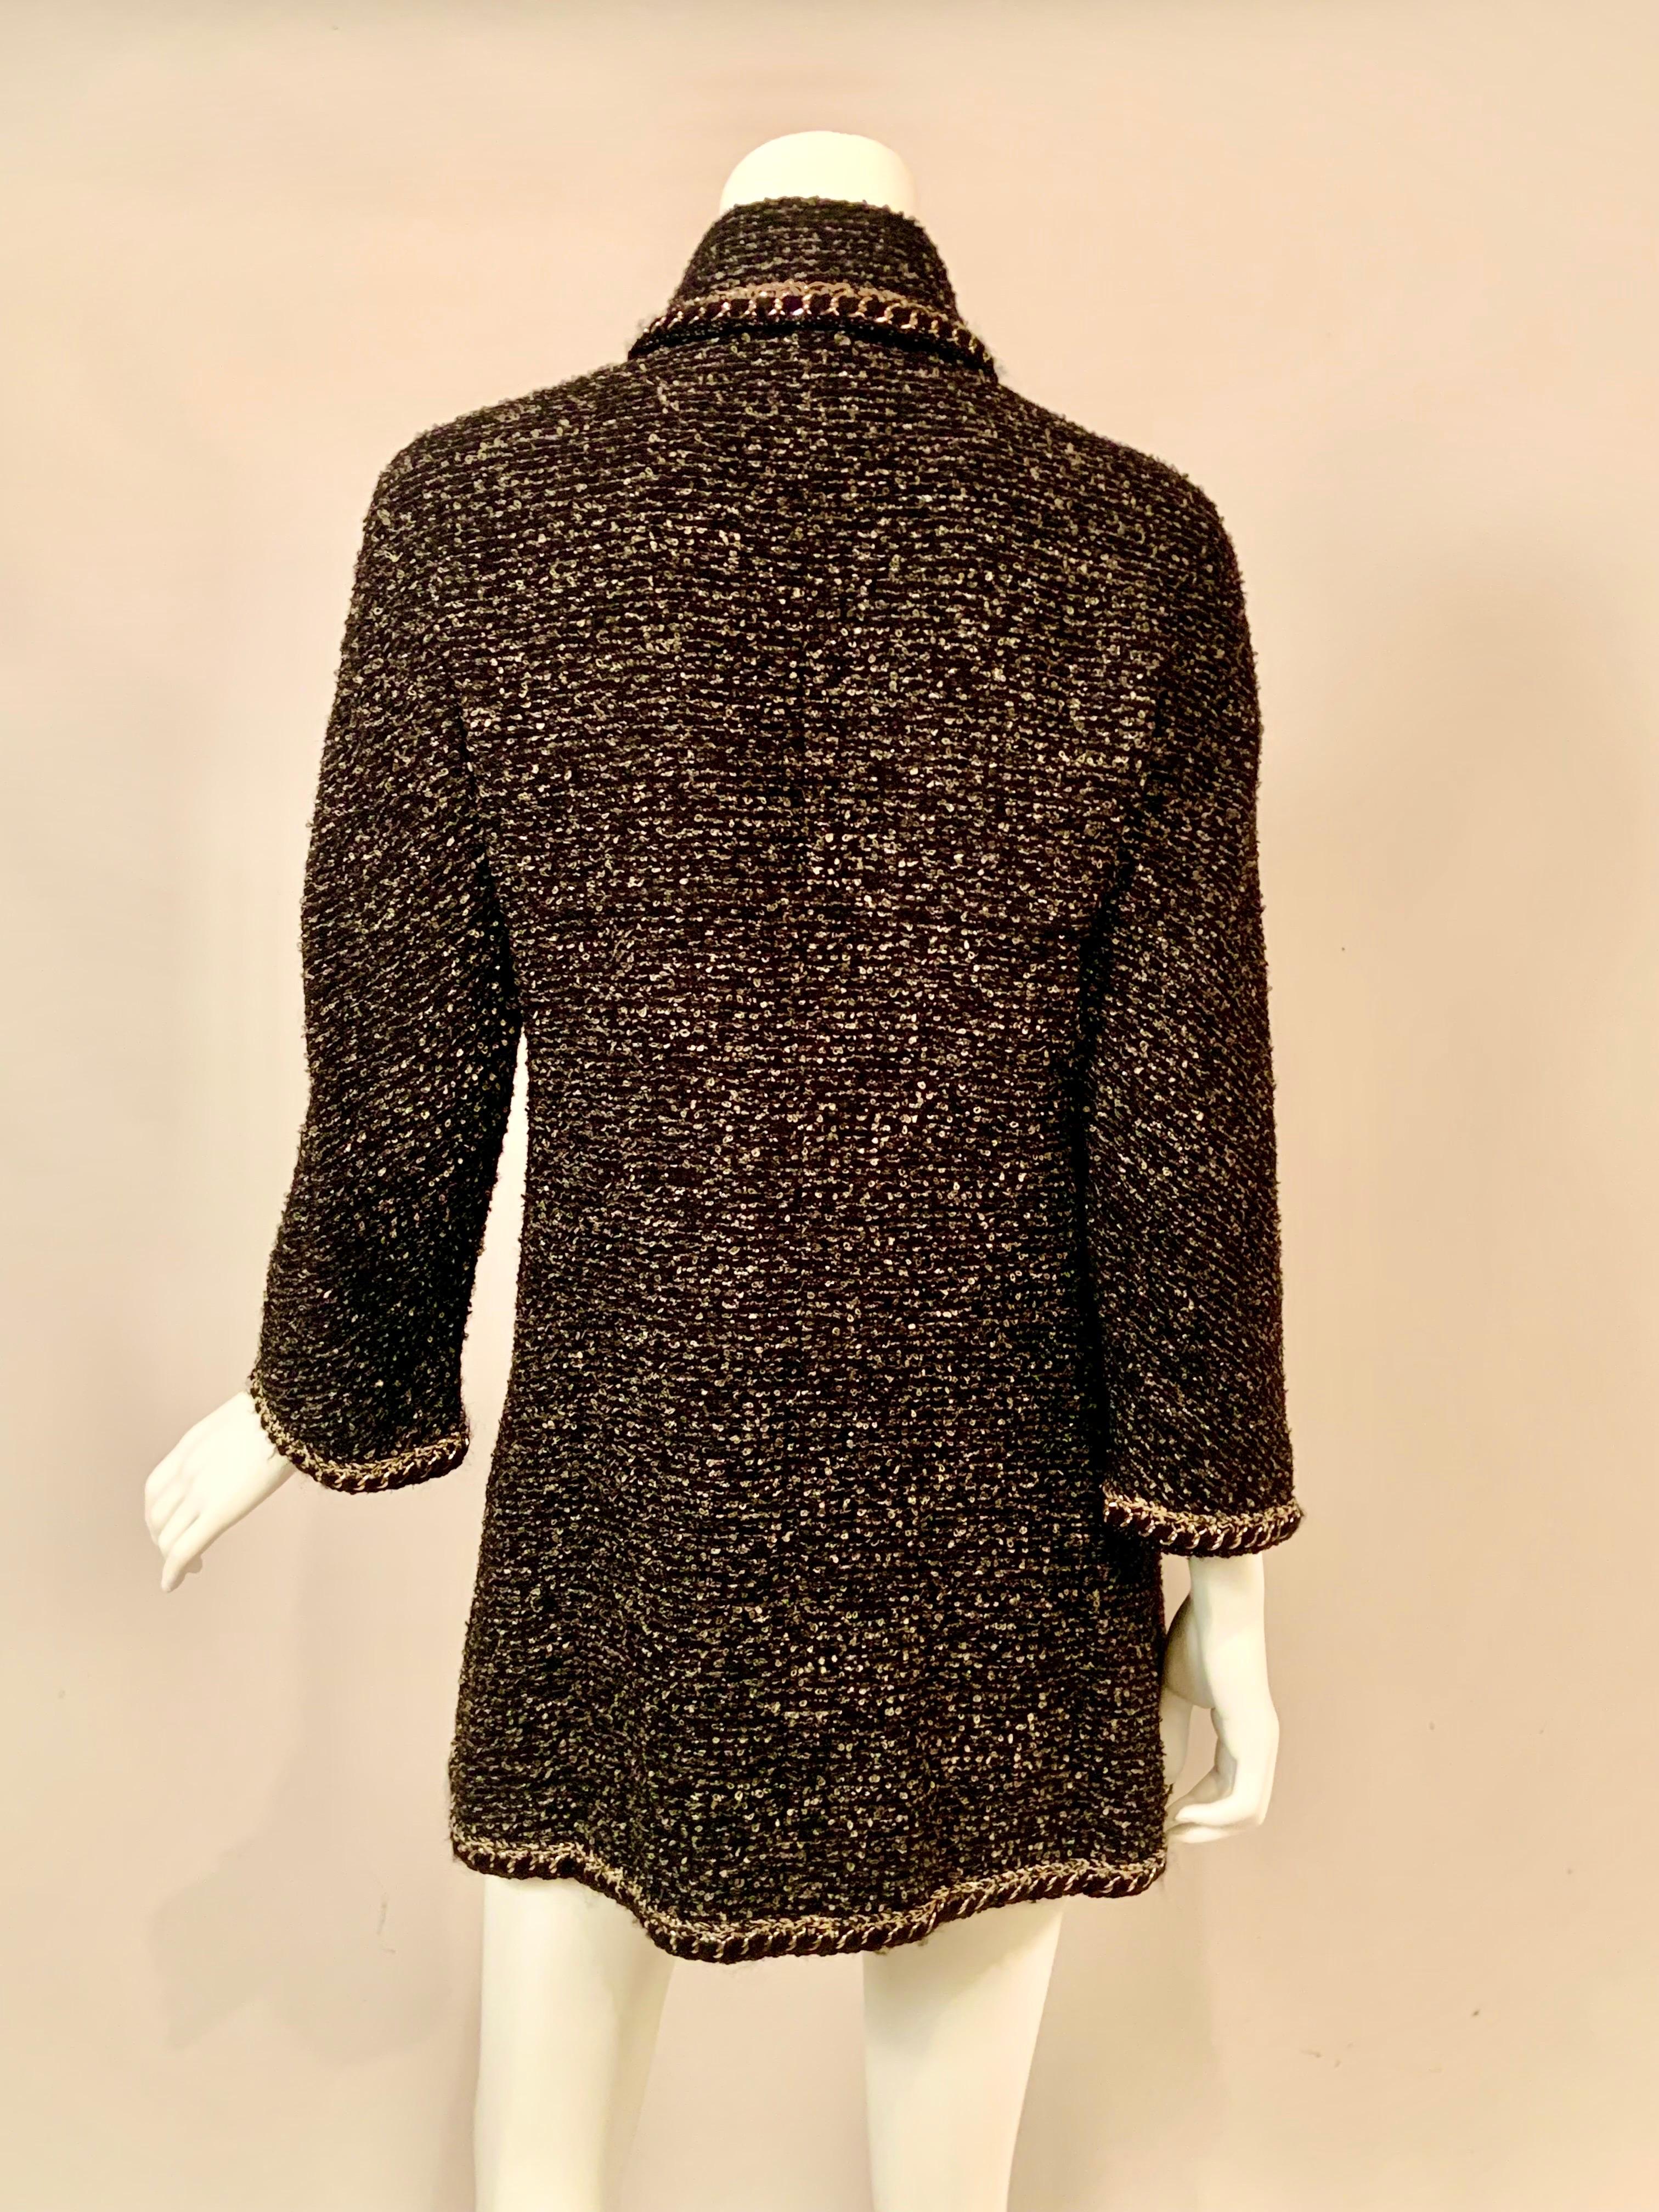 Chanel Chain Trimmed Black and Cream Tweed Jacket or Short Coat 6